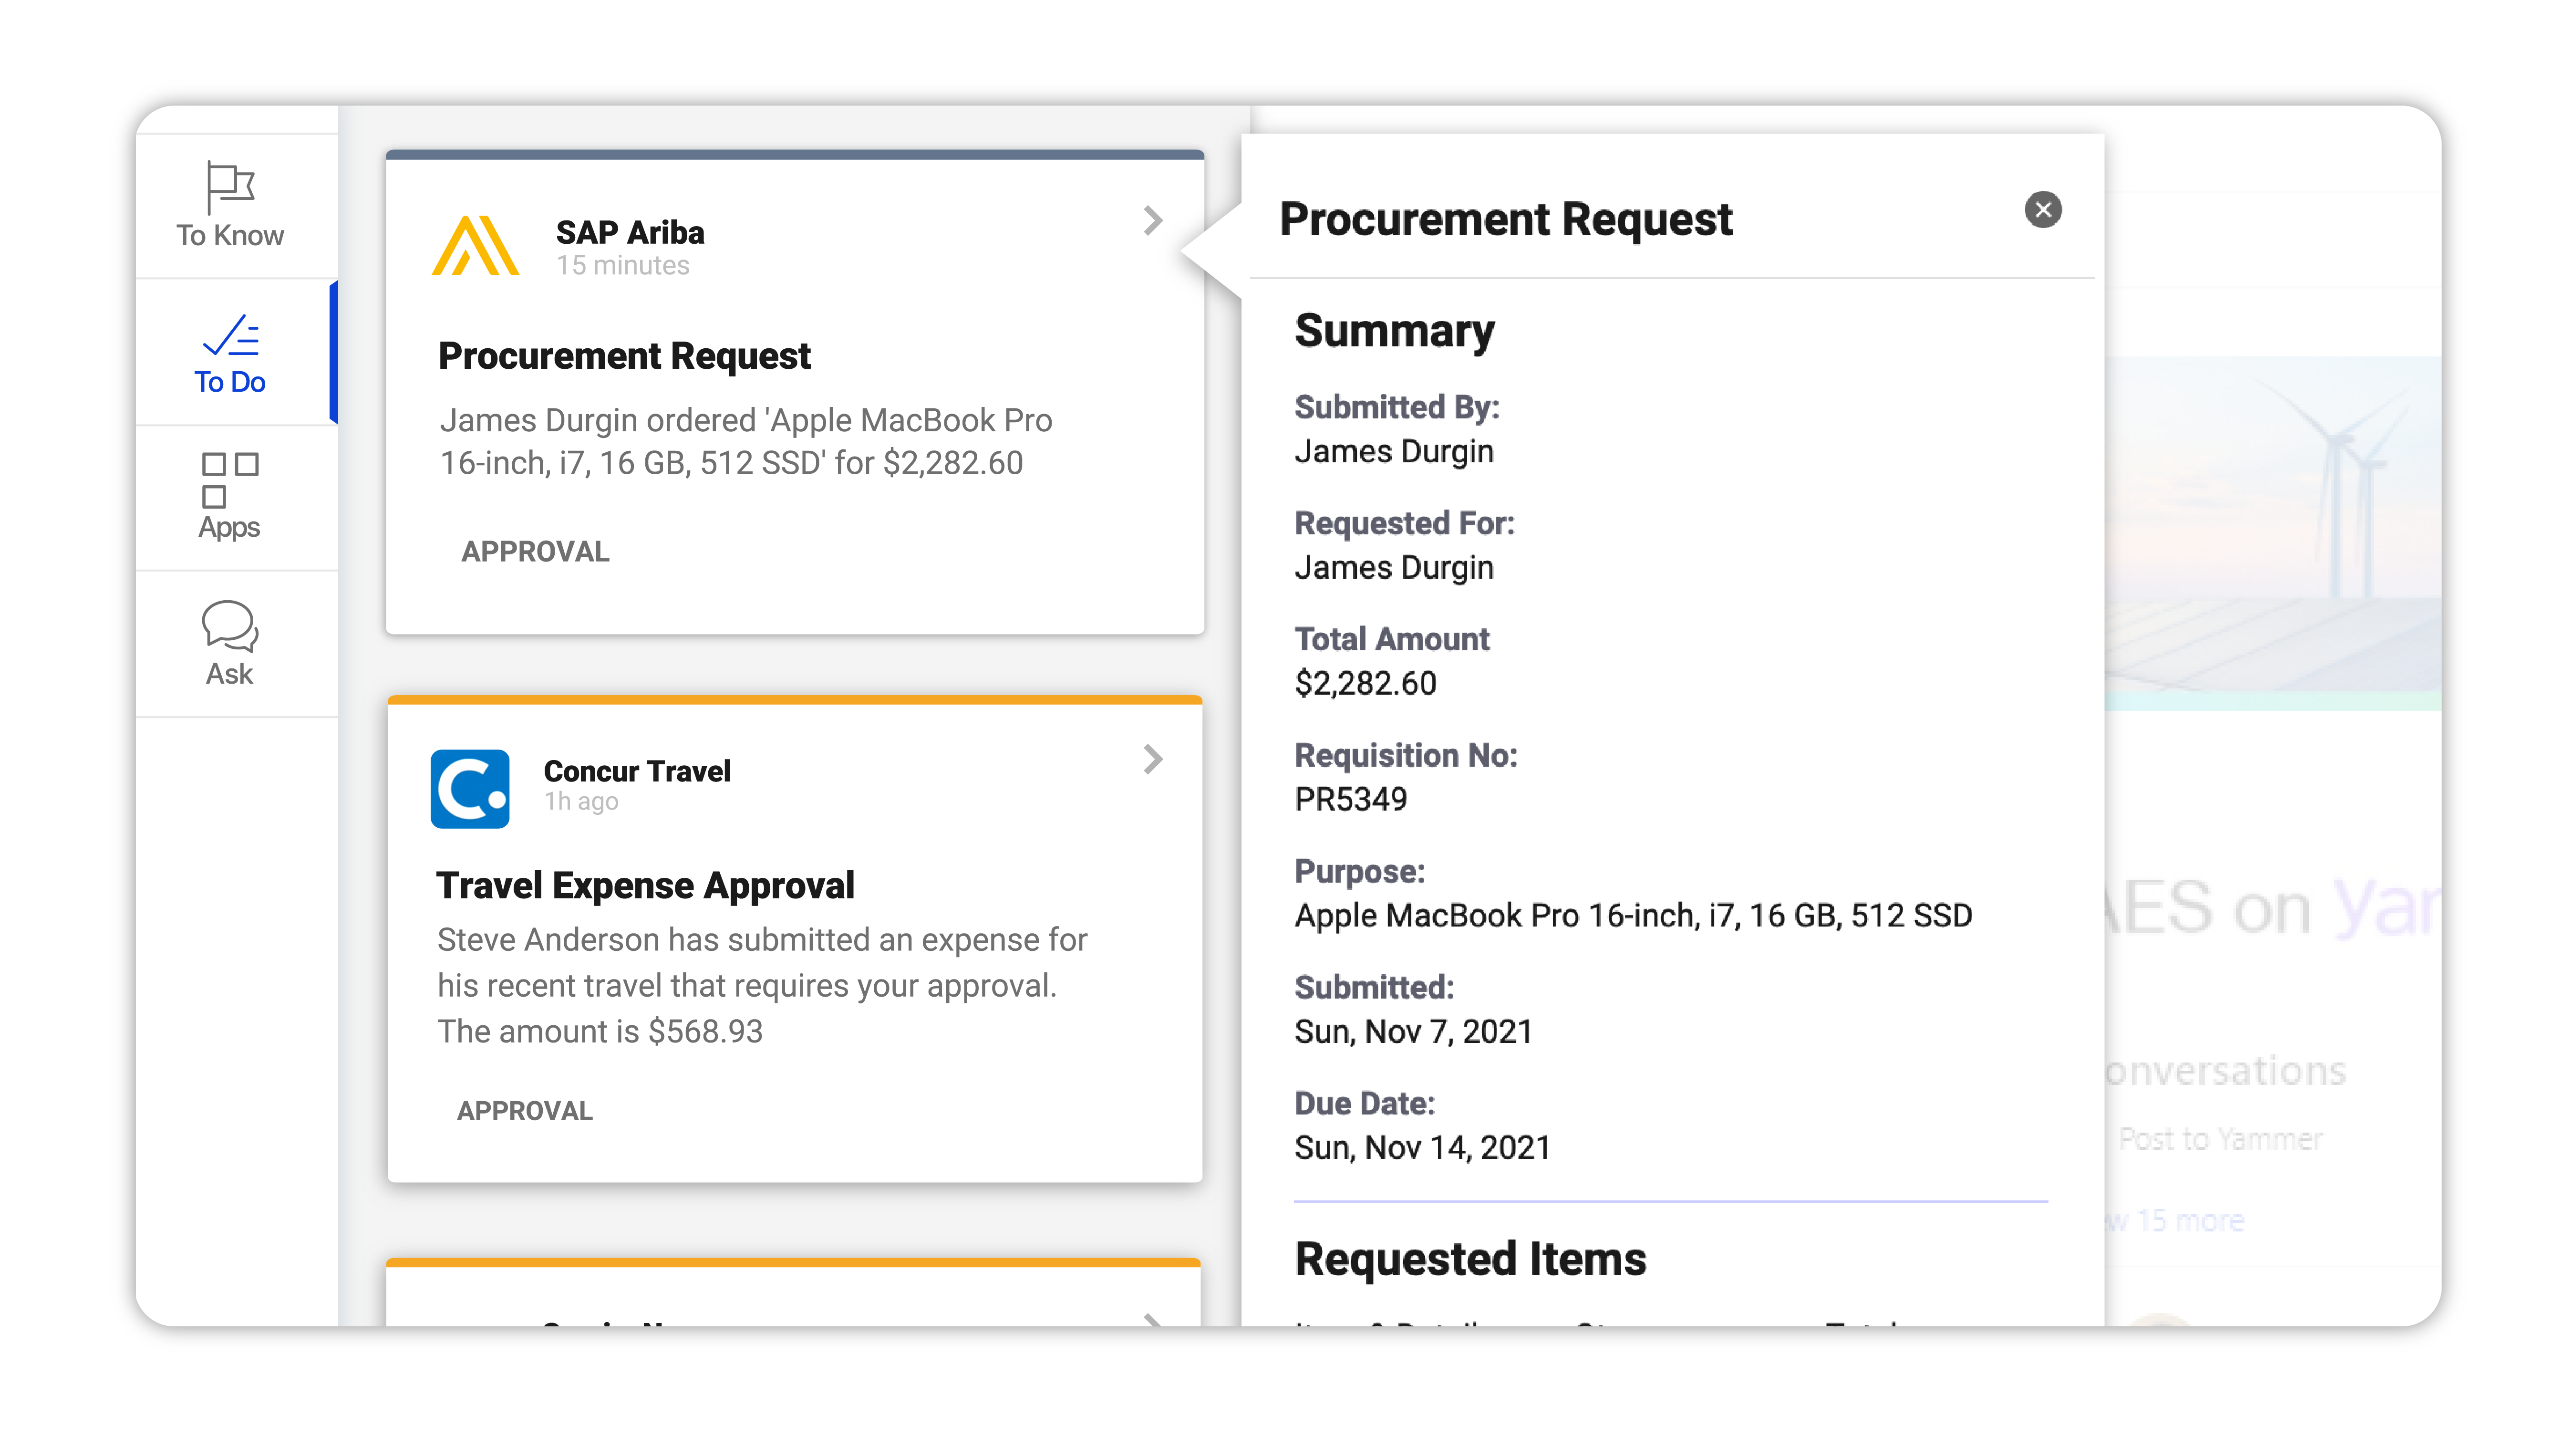 Integrate source systems with Workgrid to deliver tasks such as approvals and notifications in one unified location.